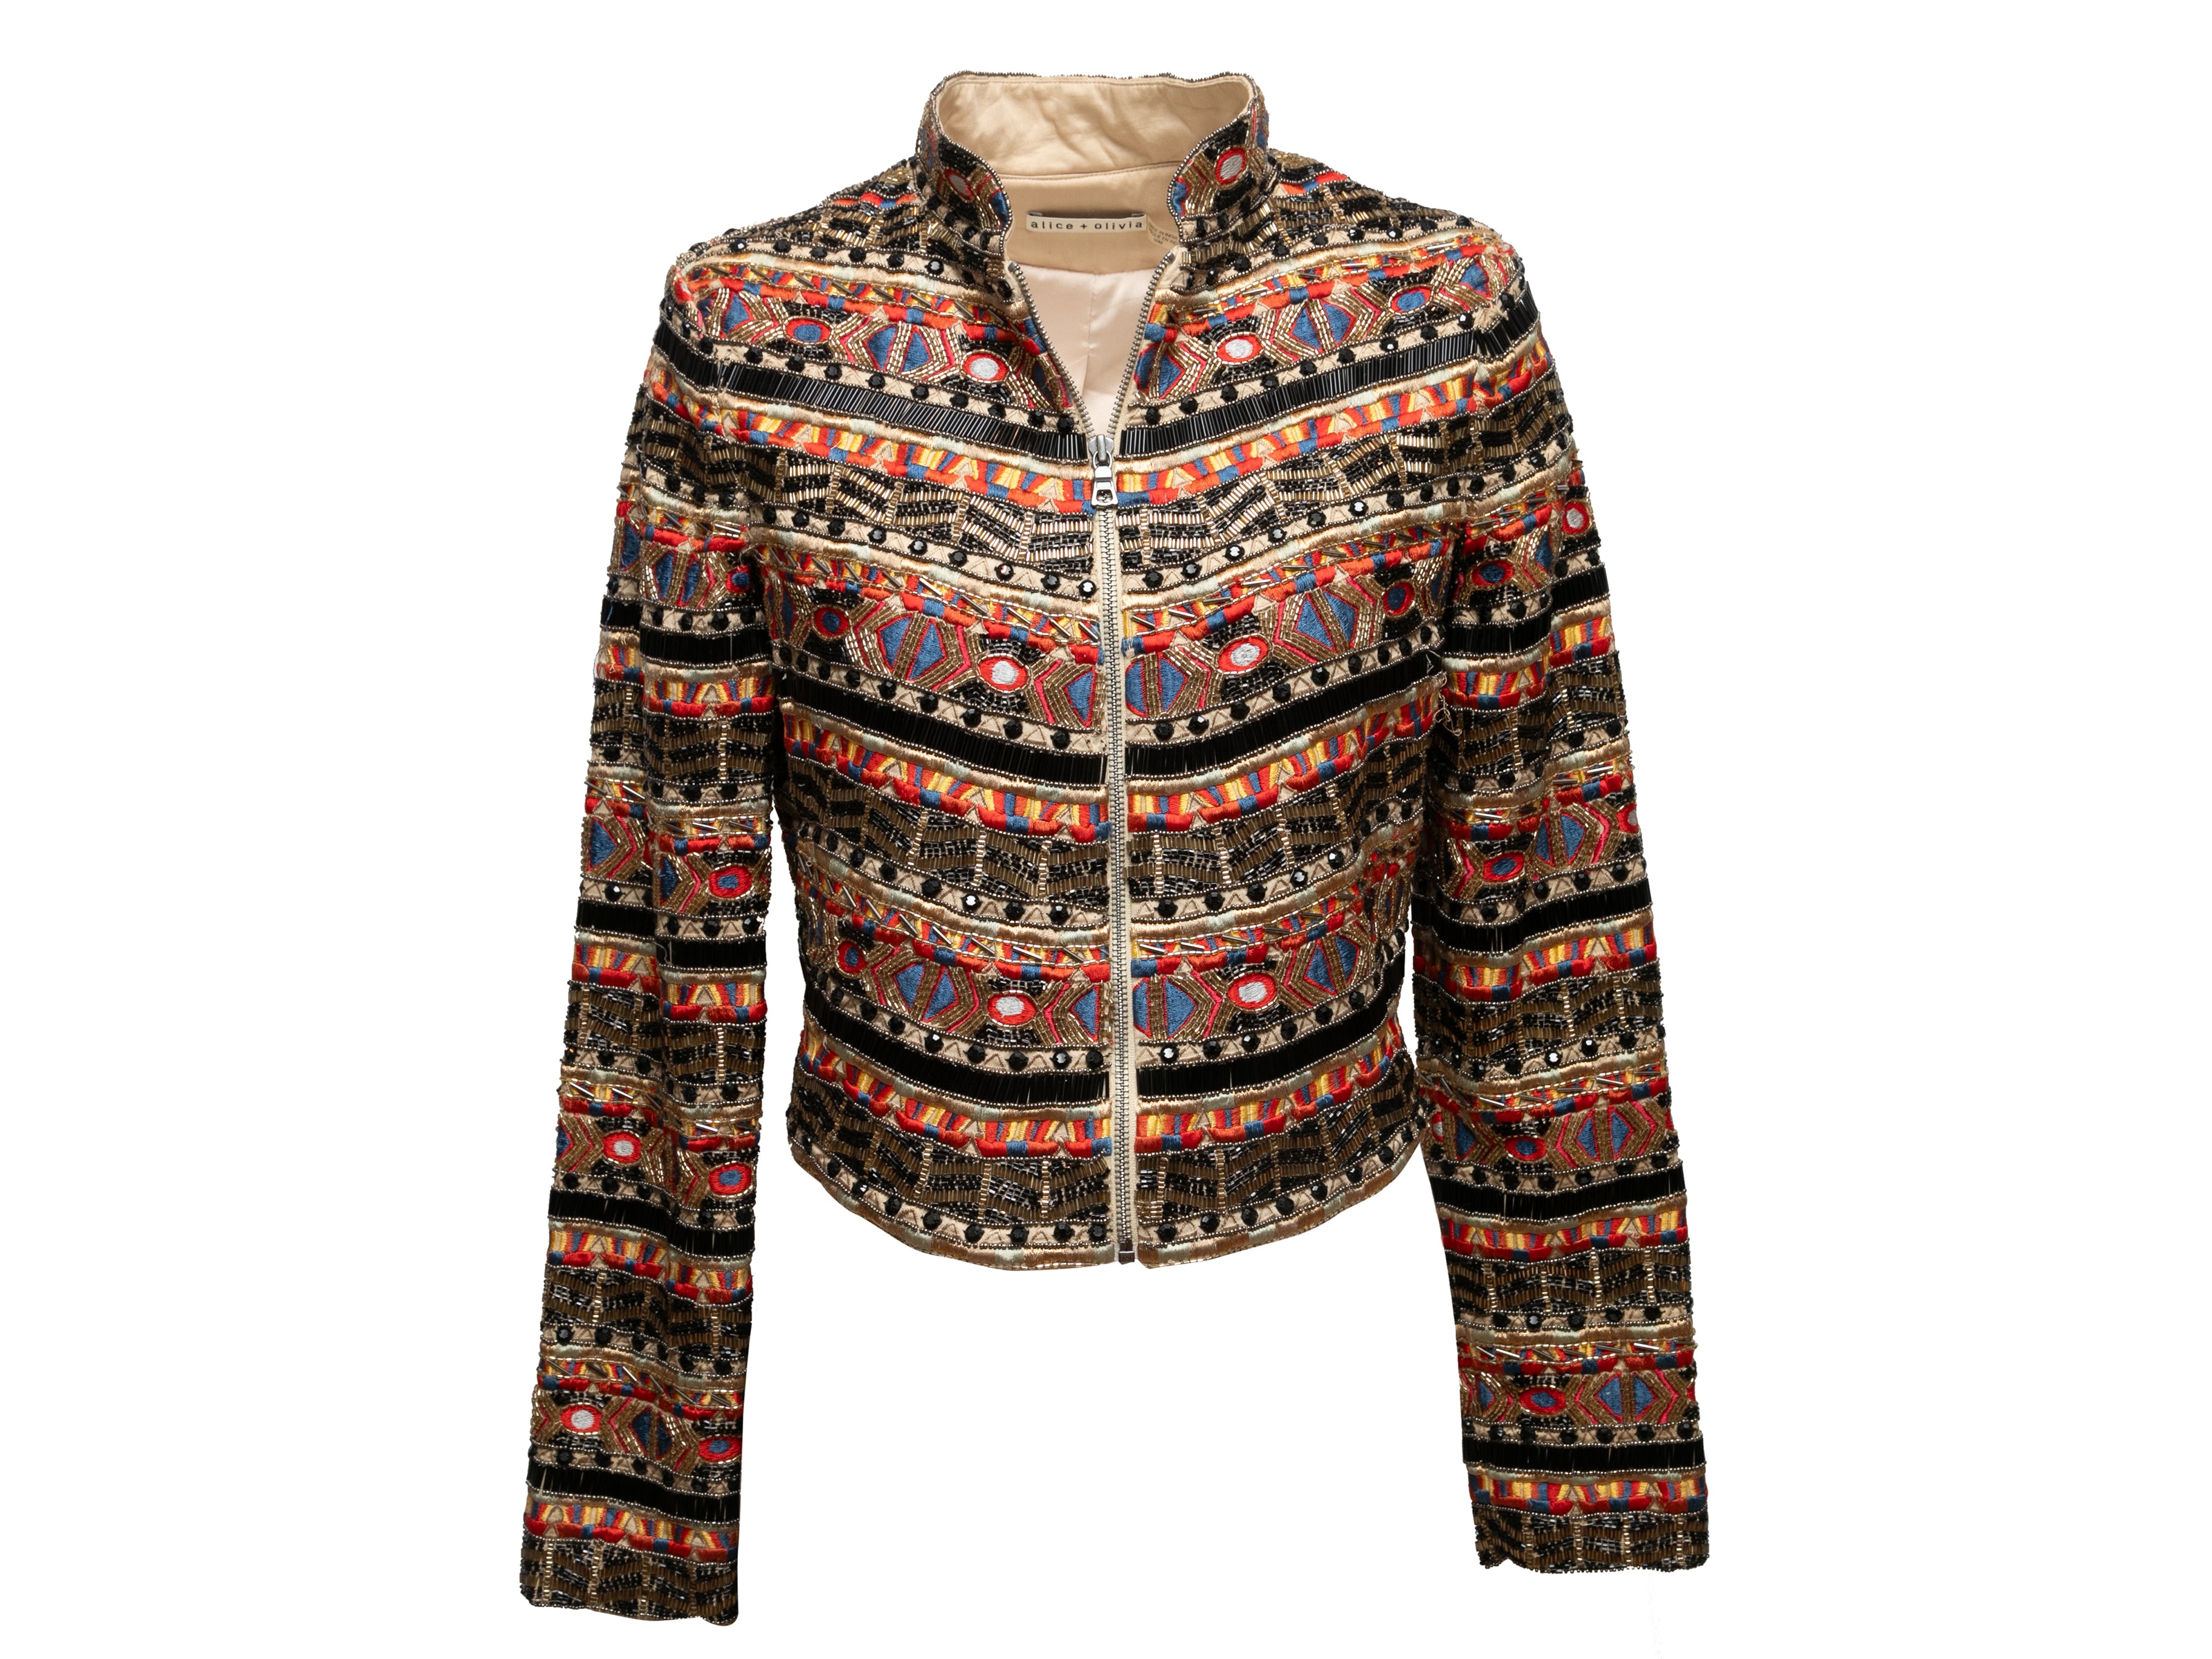 Tan & Multicolor Embroidered Jacket Size US M